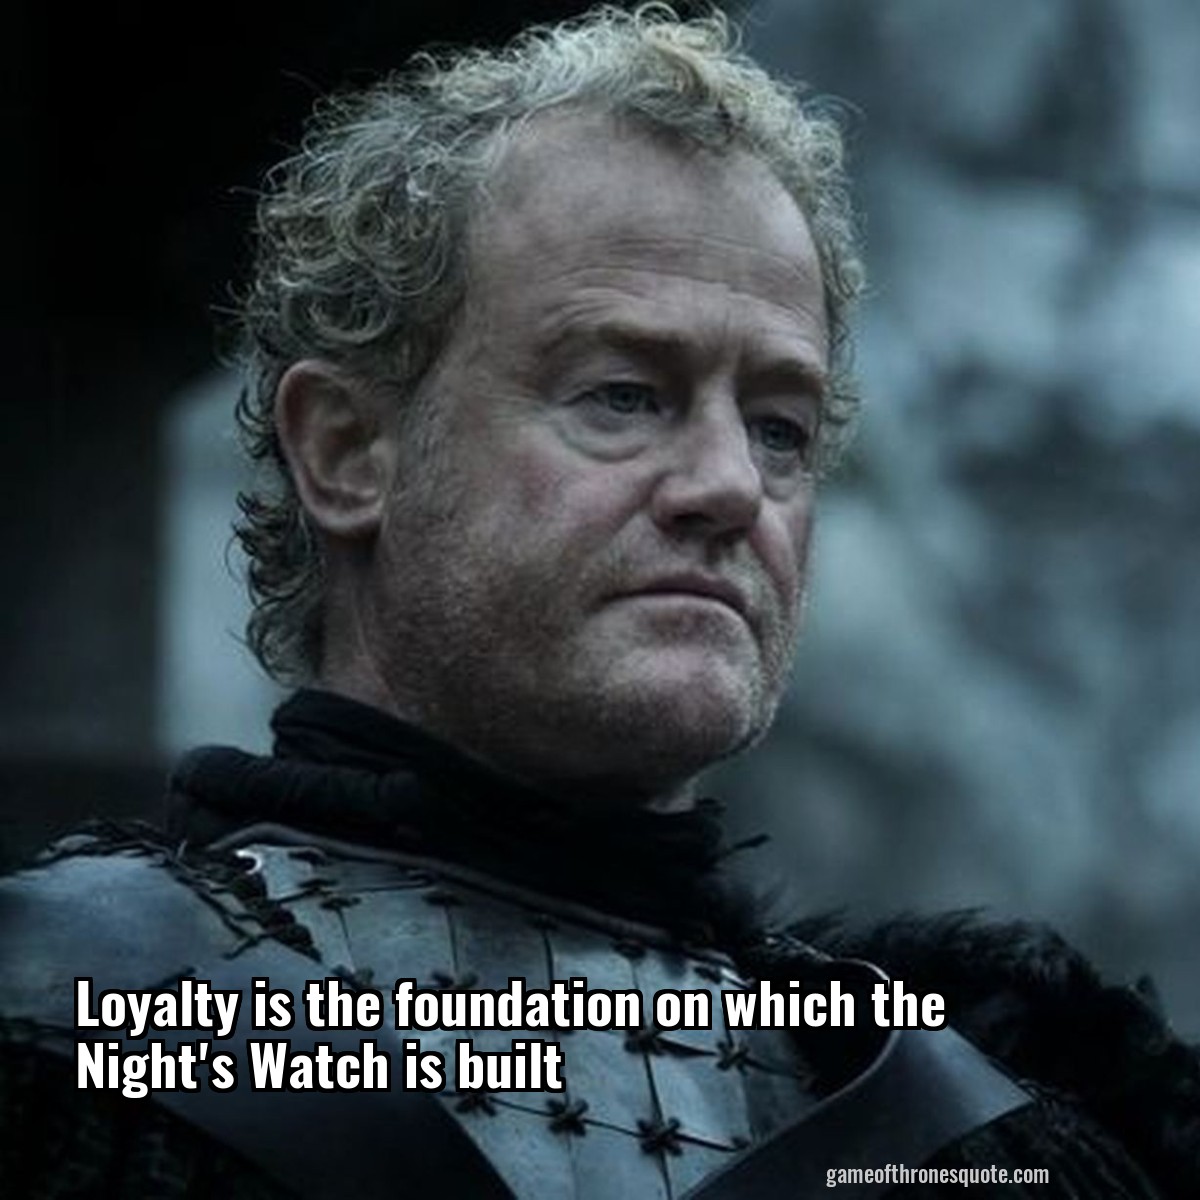 Loyalty is the foundation on which the Night's Watch is built